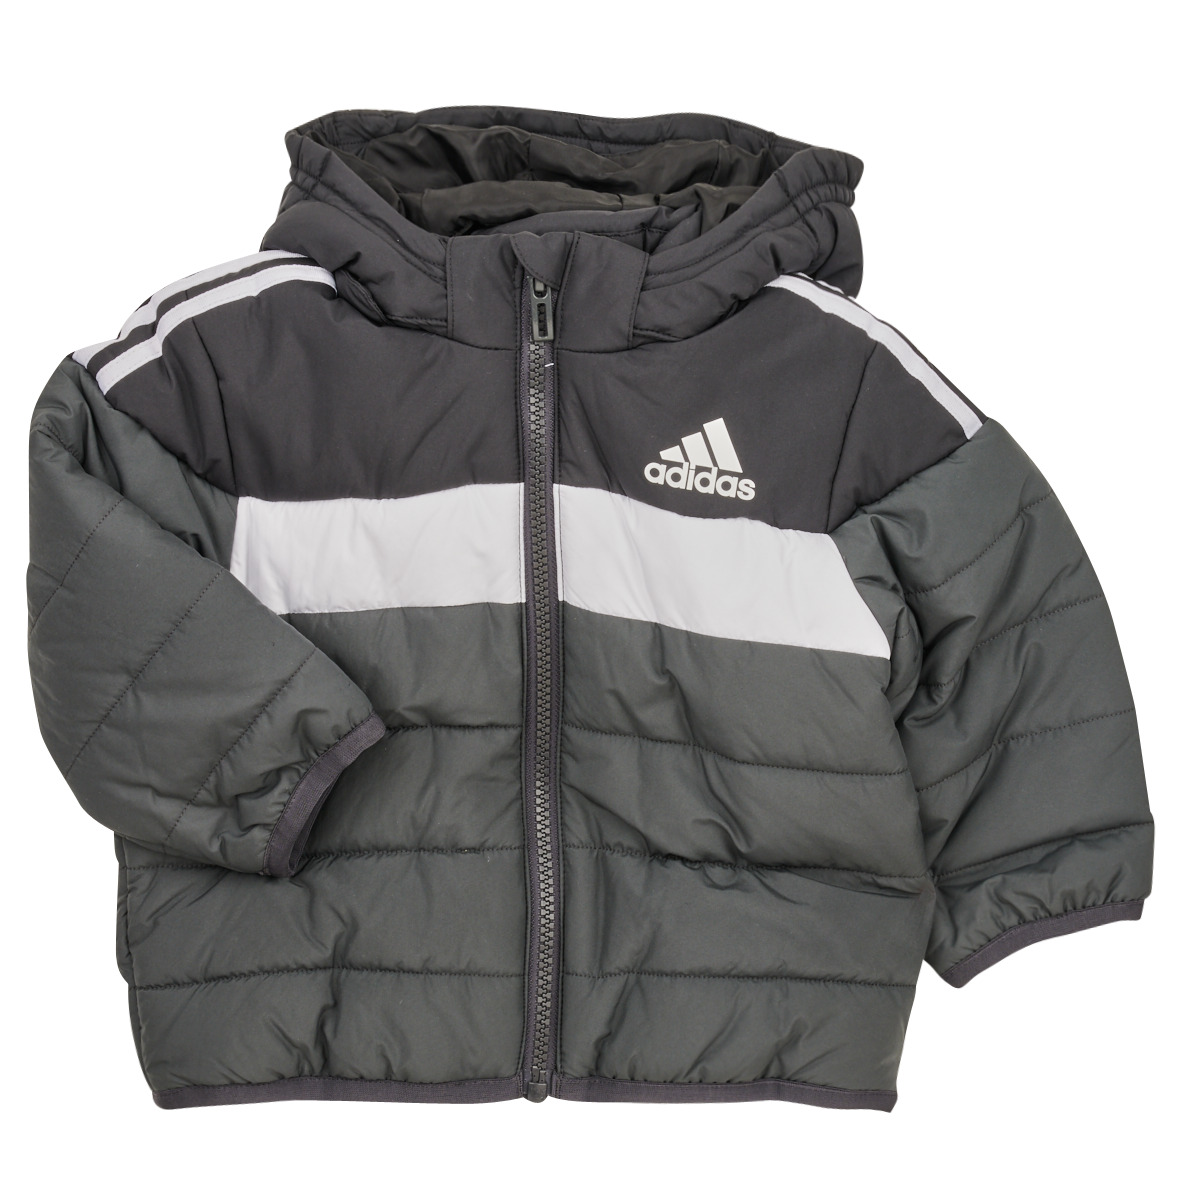 Black JKT Free IN Sportswear coats | Duffel F ! - NET delivery Child PAD - Spartoo Adidas Clothing